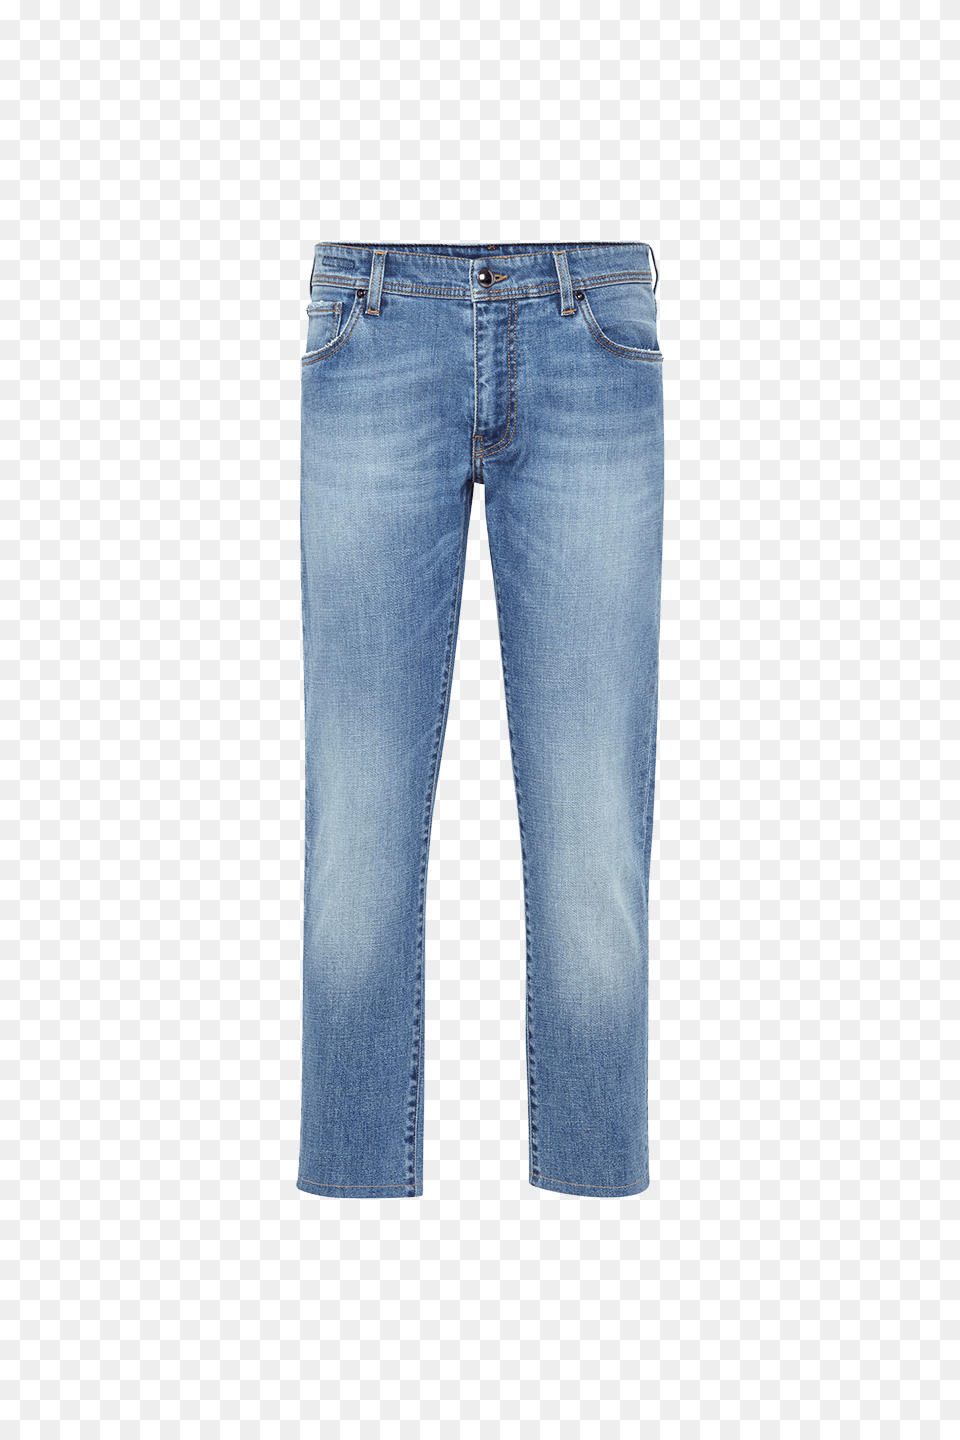 Mens Denim And Fashion Jeans Pal Zileri, Clothing, Pants Png Image